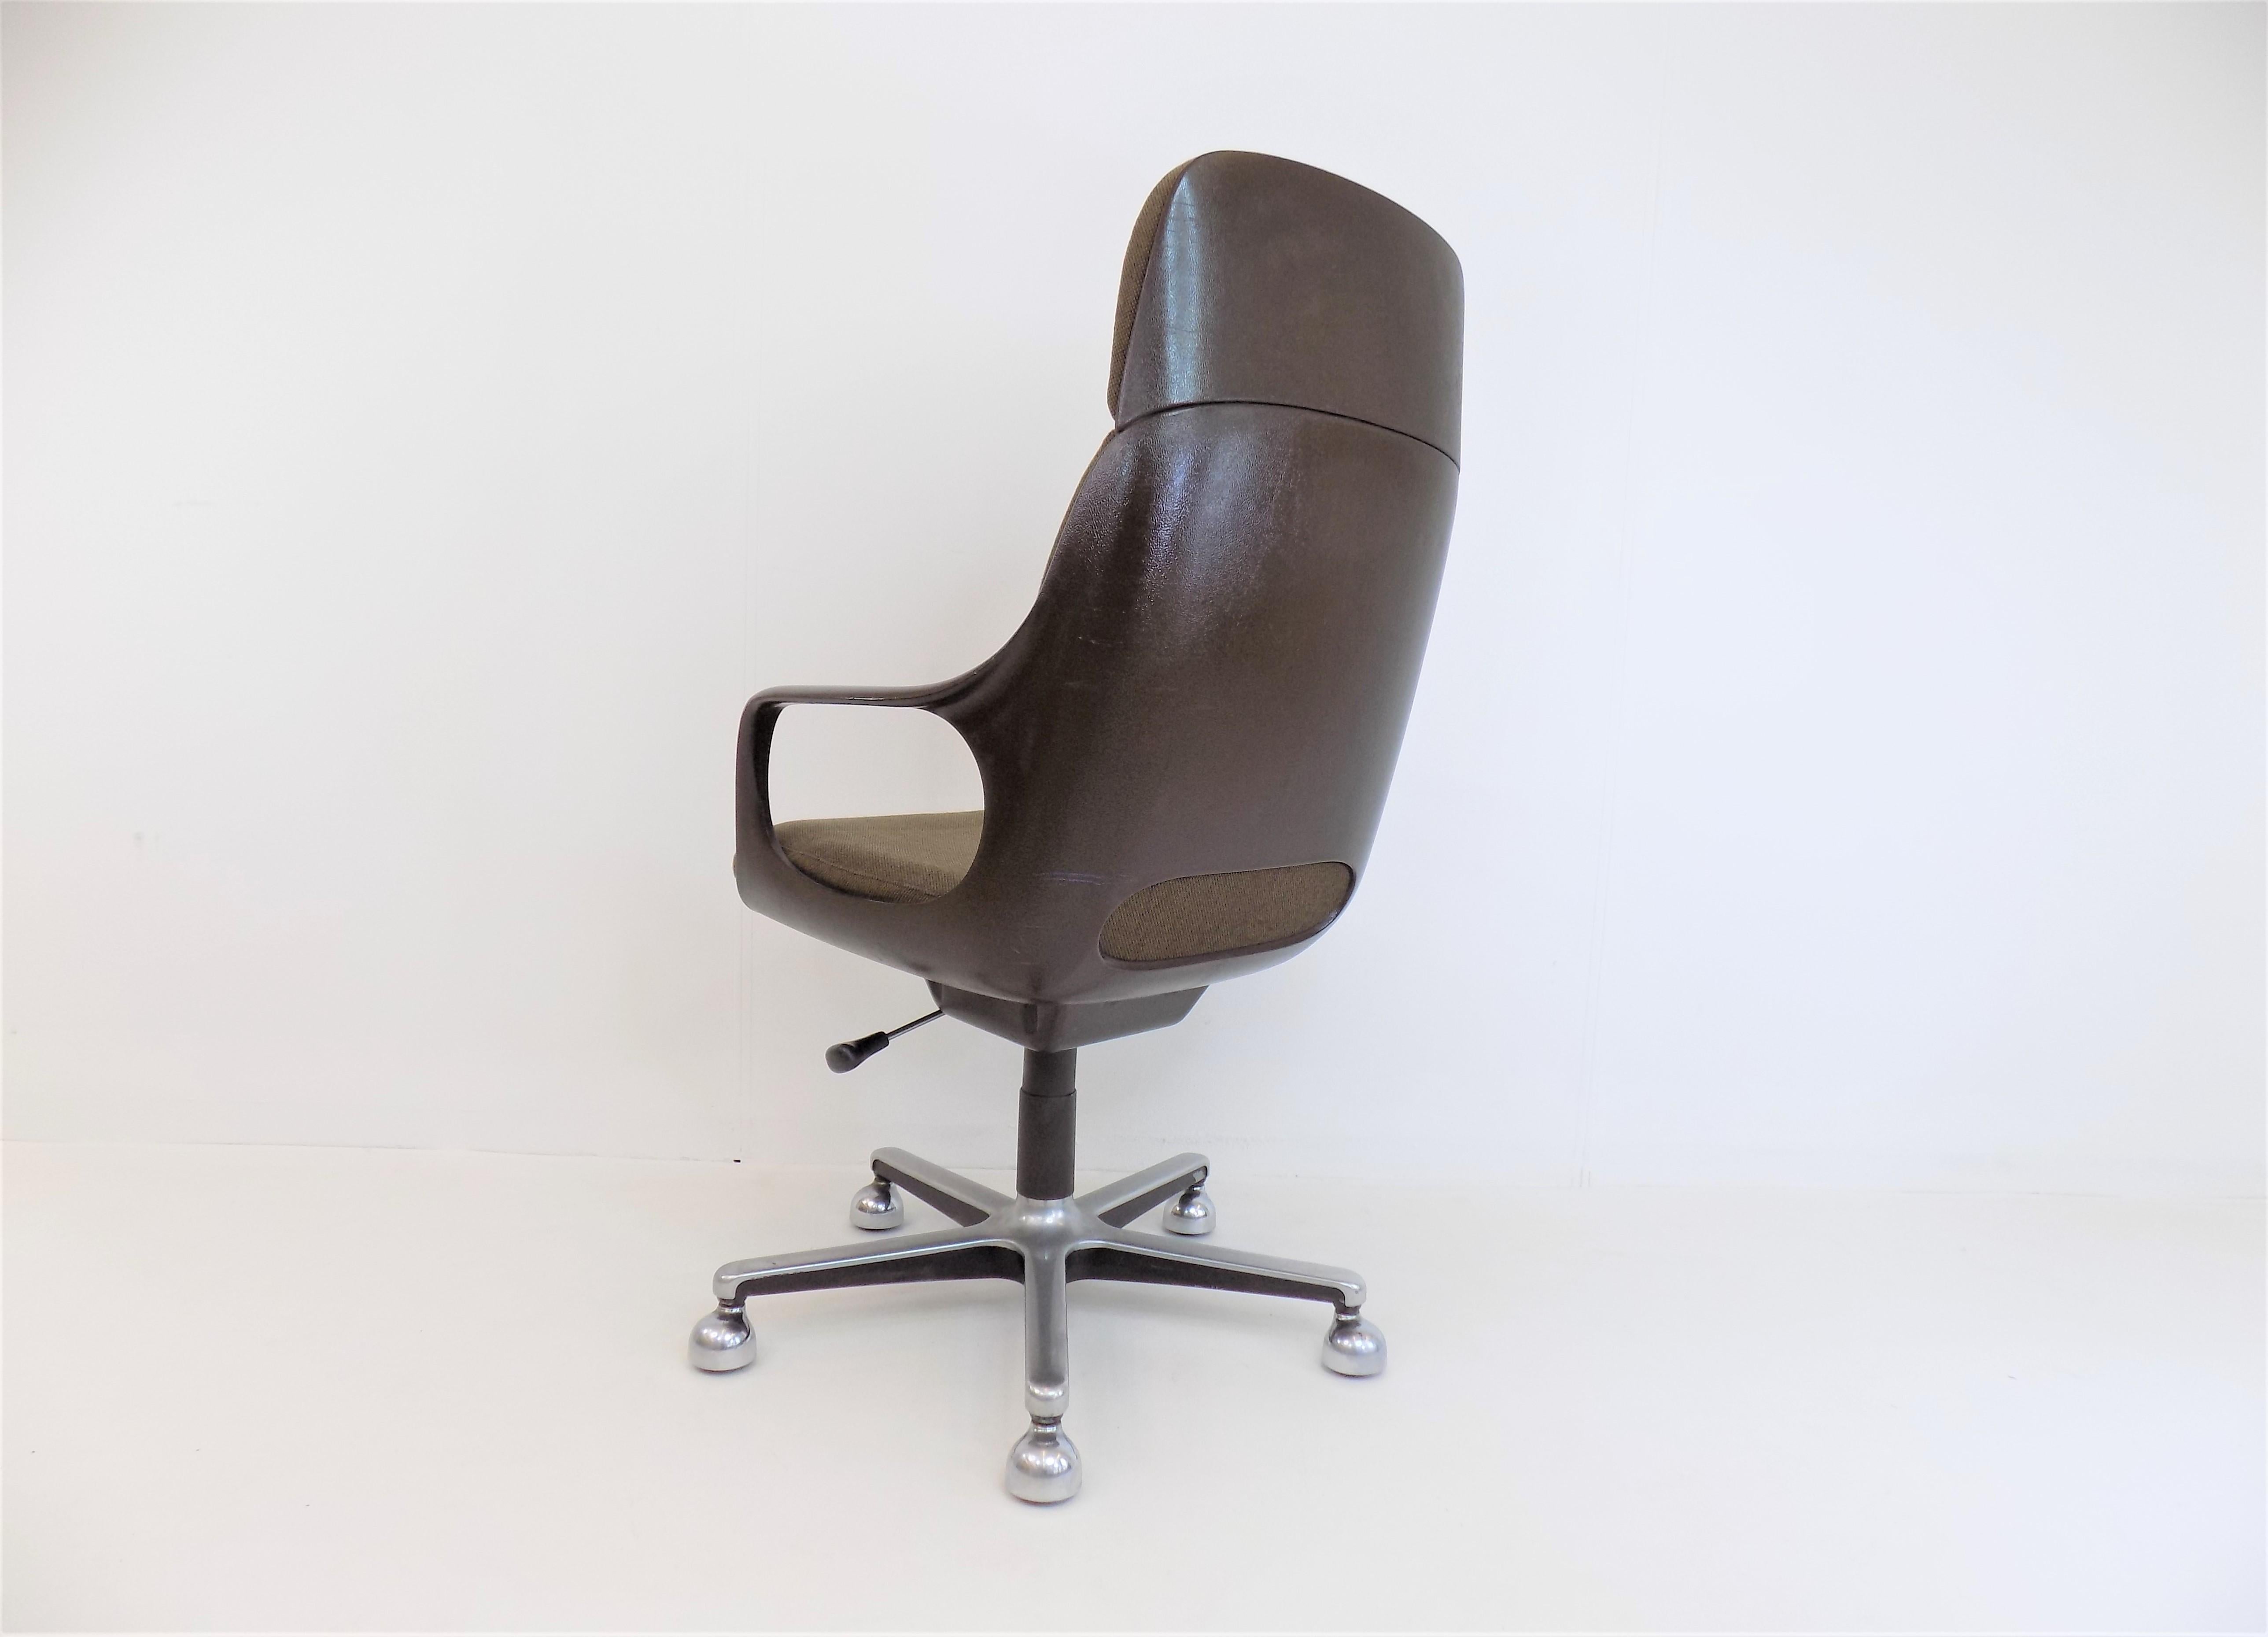 Space Age Drabert Concept Office Chair